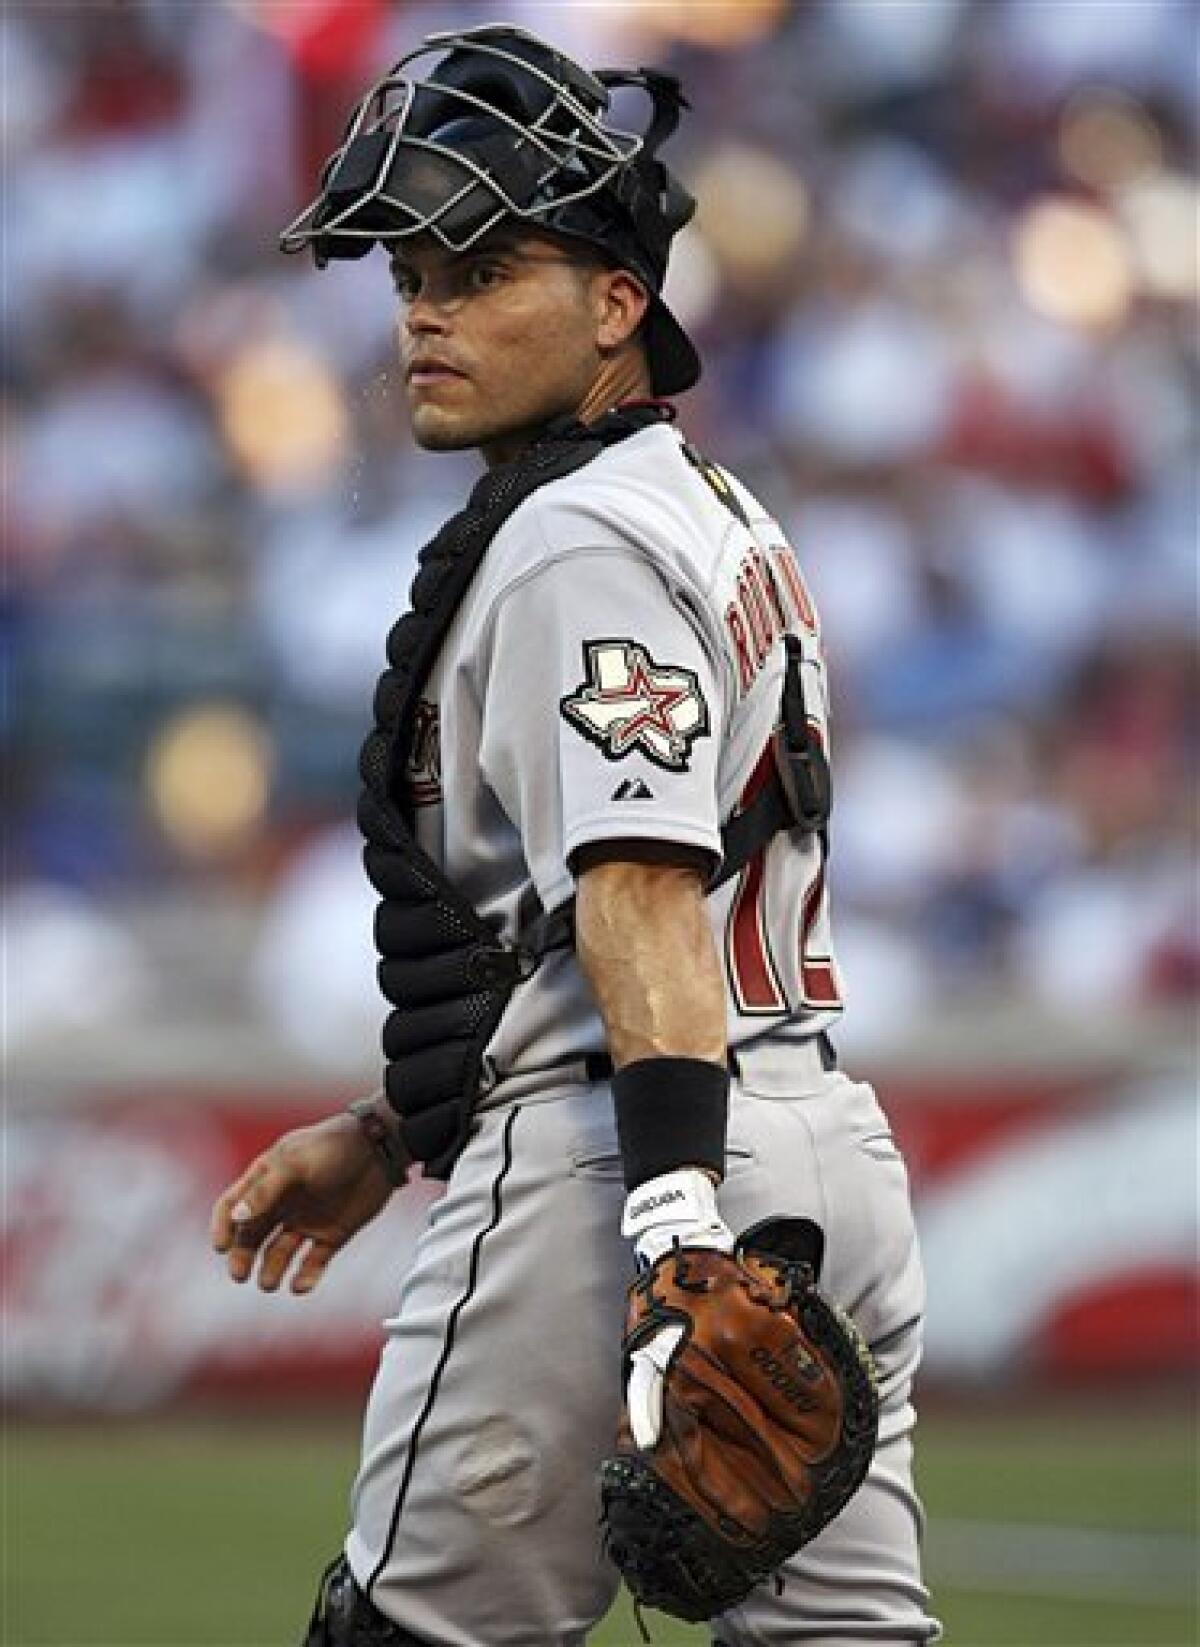 Saving Detroit Tigers might help Pudge Rodriguez make Hall of Fame